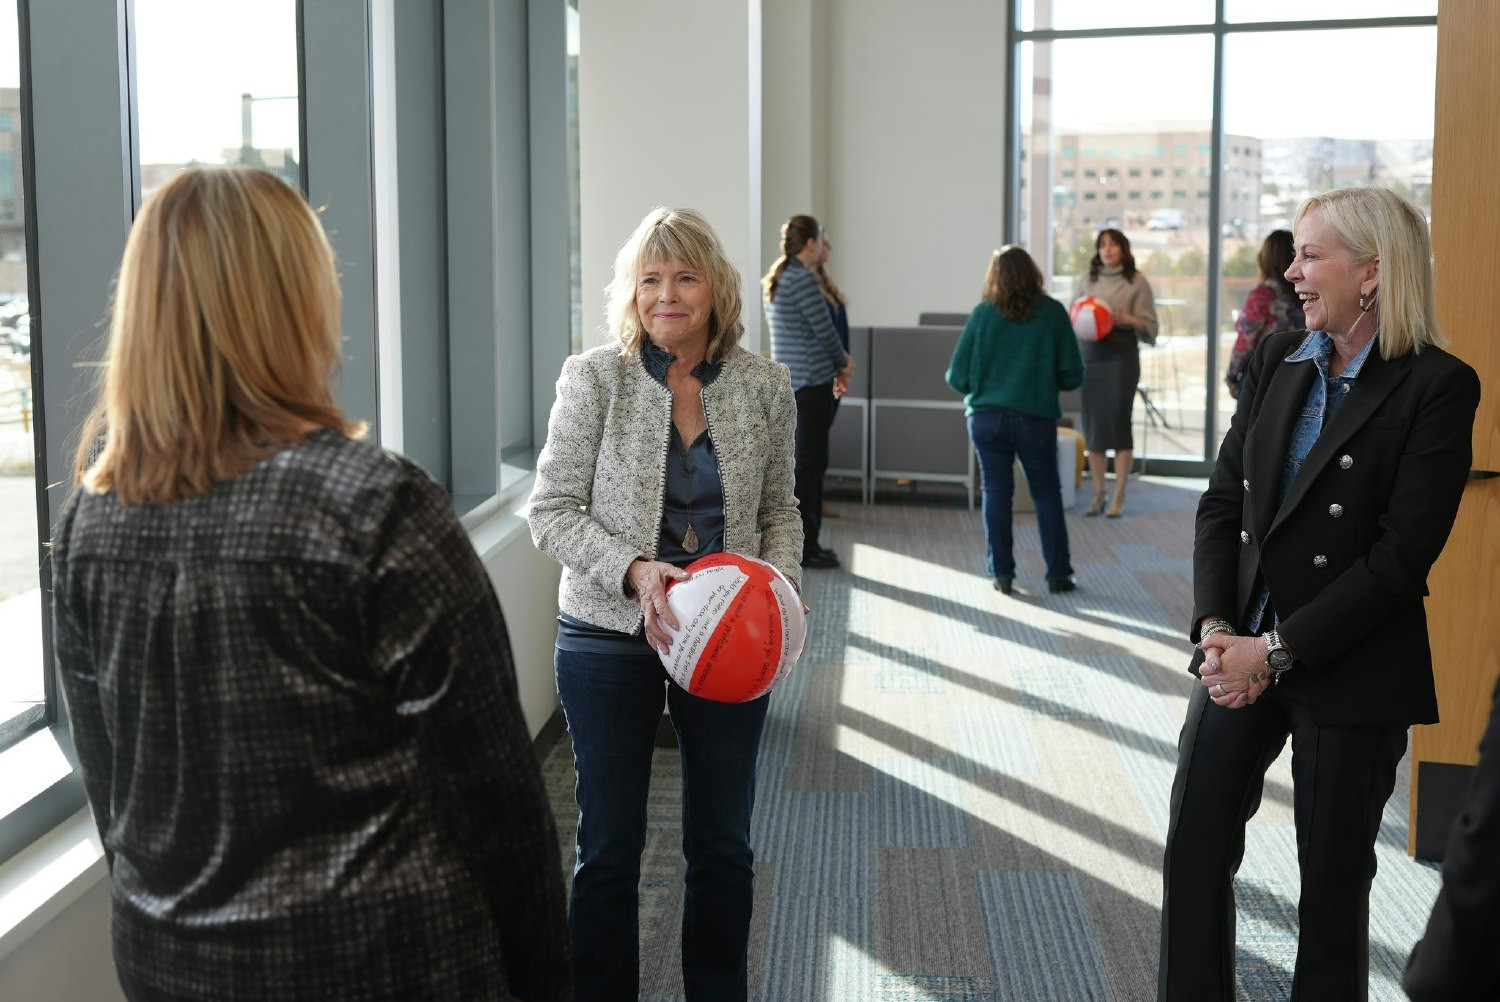 This photo was taken at our annual kick-off meeting where employees participated in a team building activity.